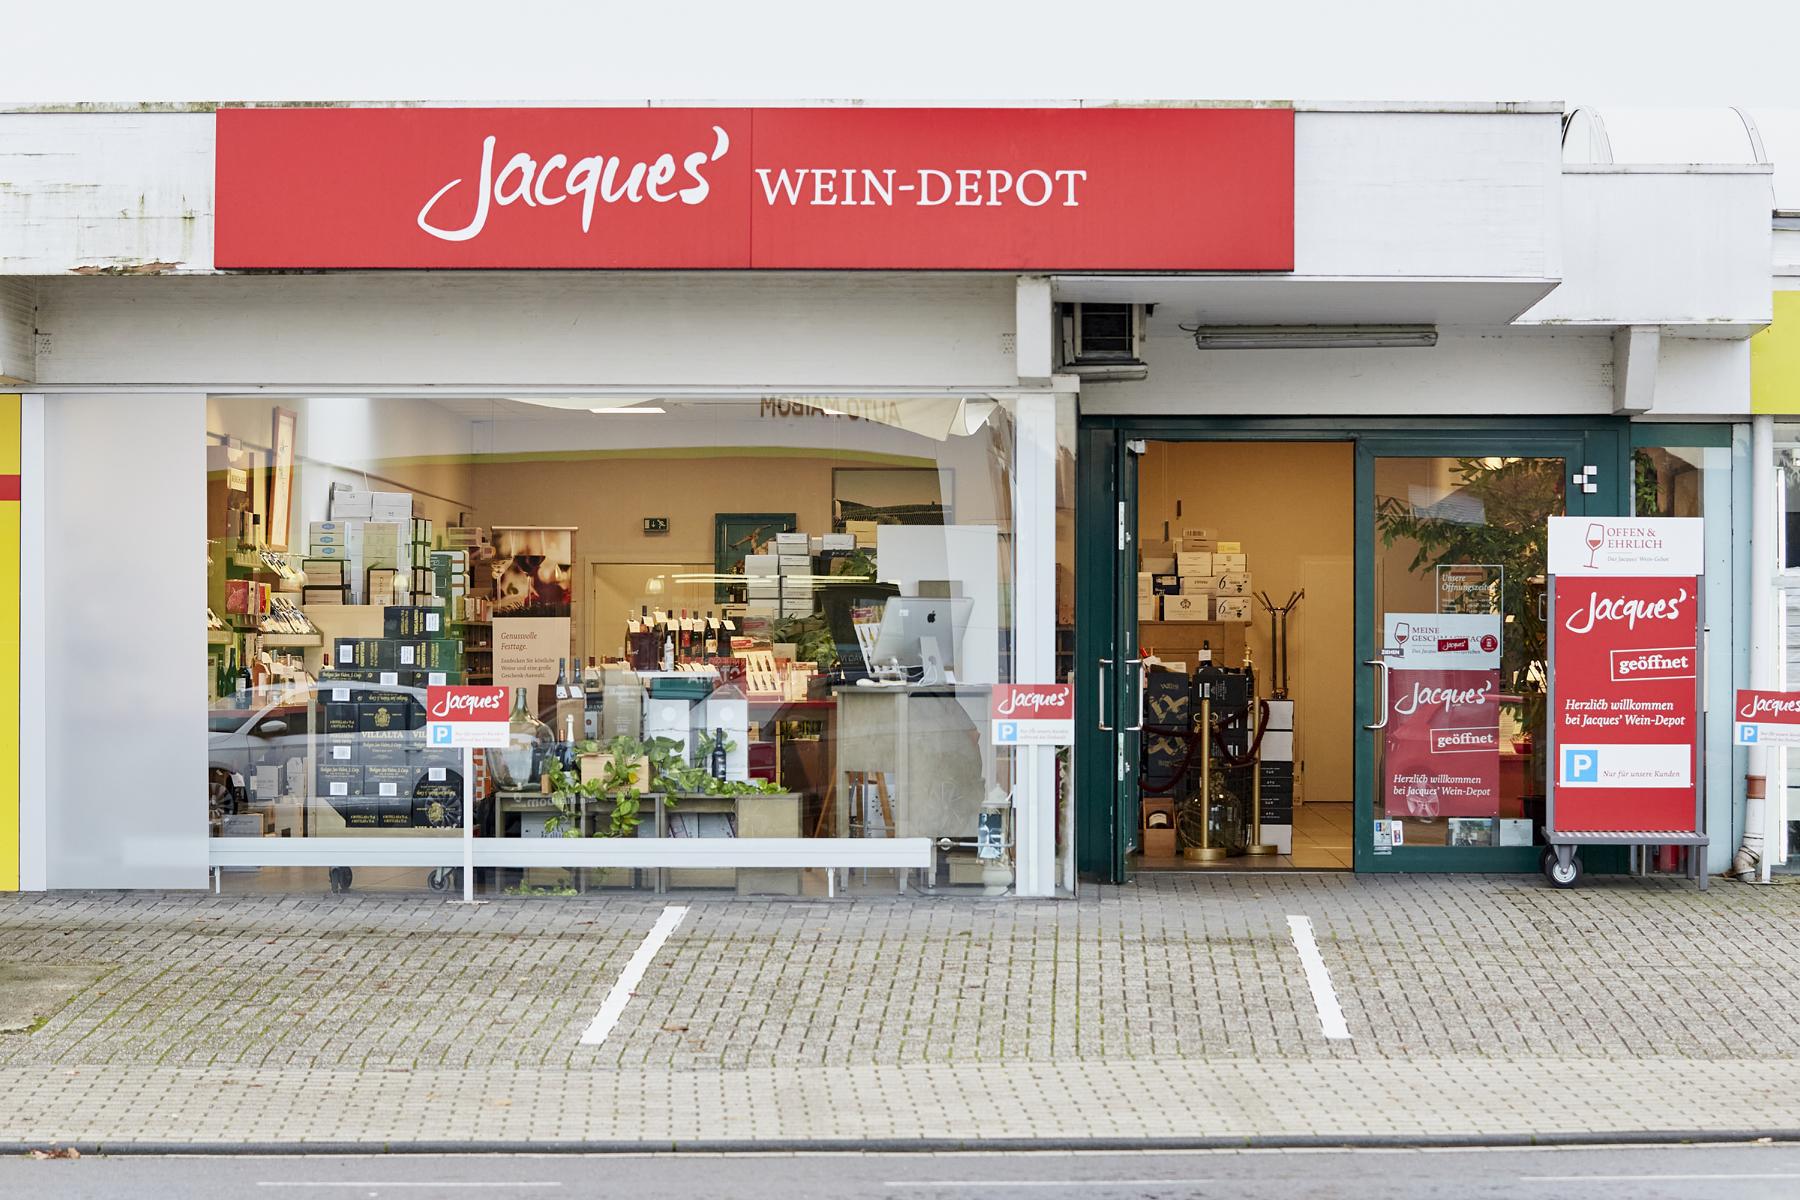 Bild 2 Jacques’ Wein-Depot Wesel in Wesel